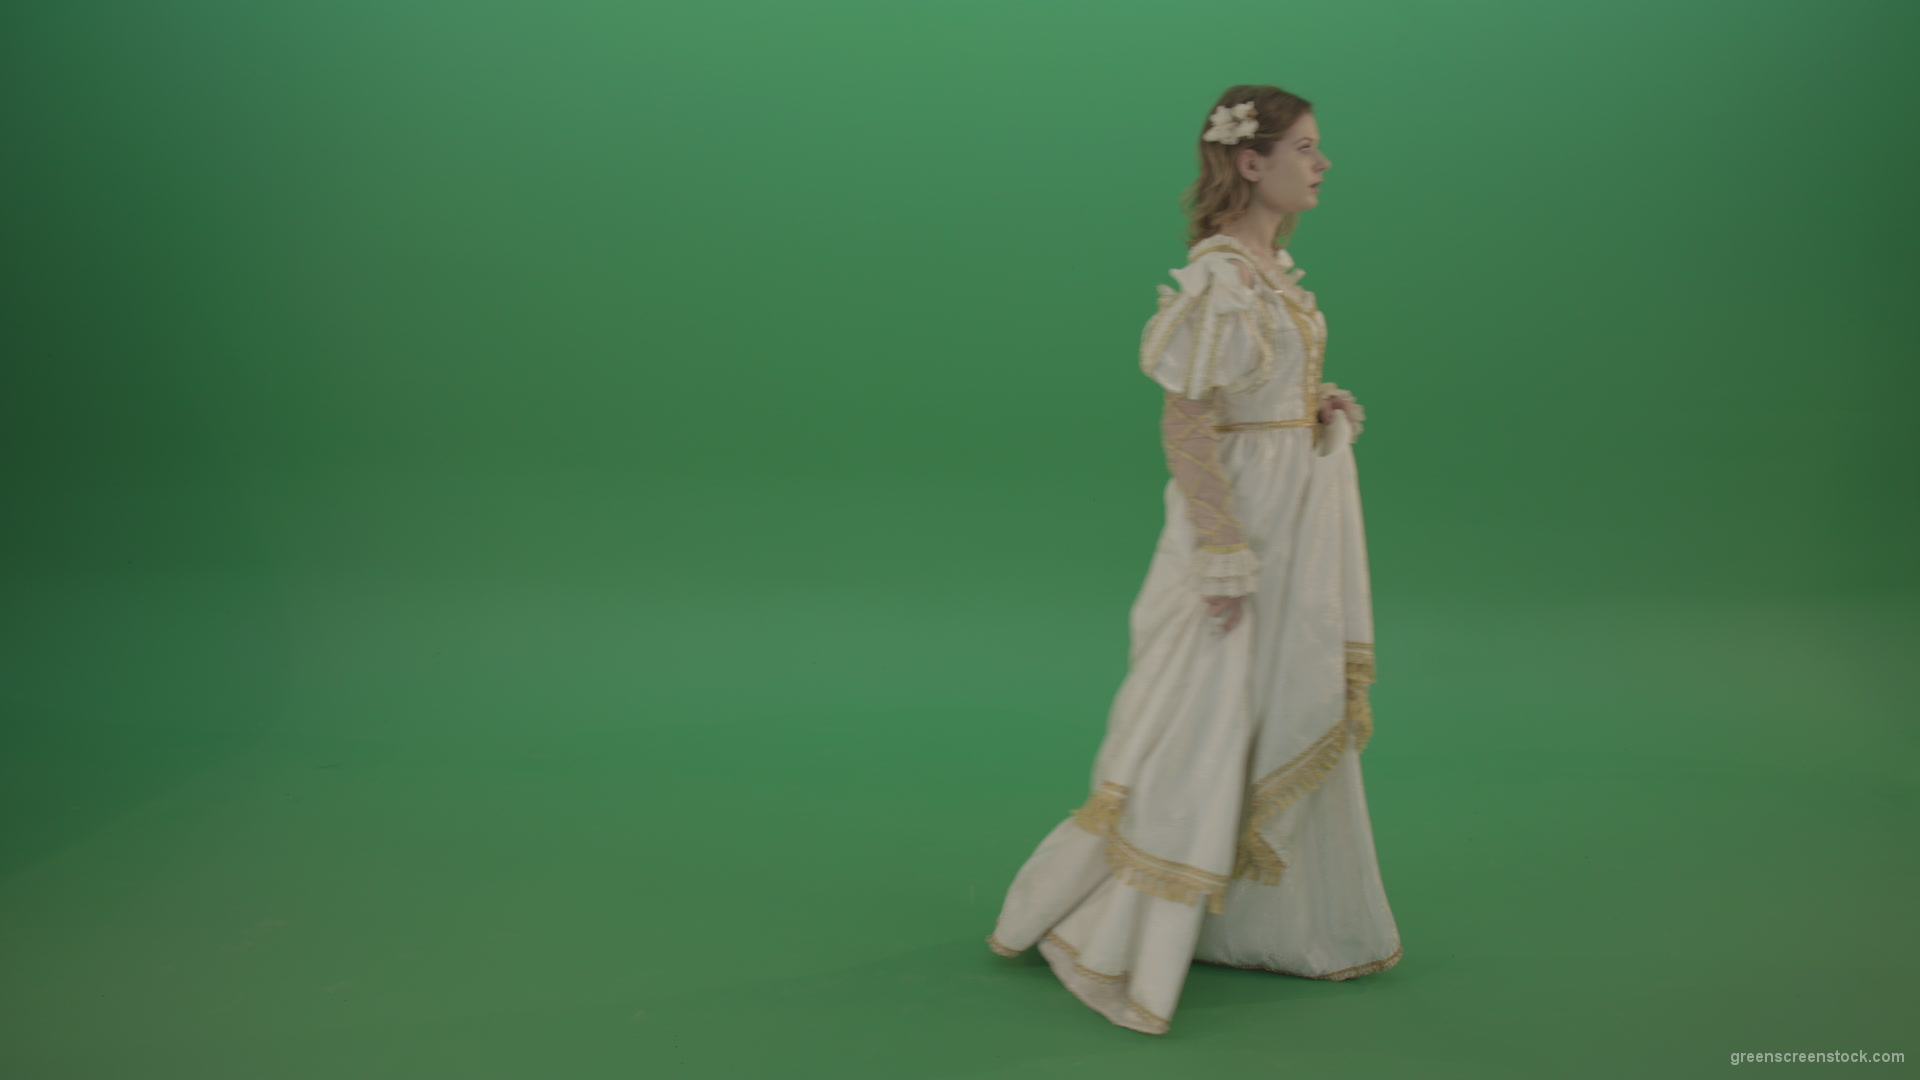 Mysterious-princess-makes-a-white-dress-goes-aside-isolated-on-green-background_006 Green Screen Stock